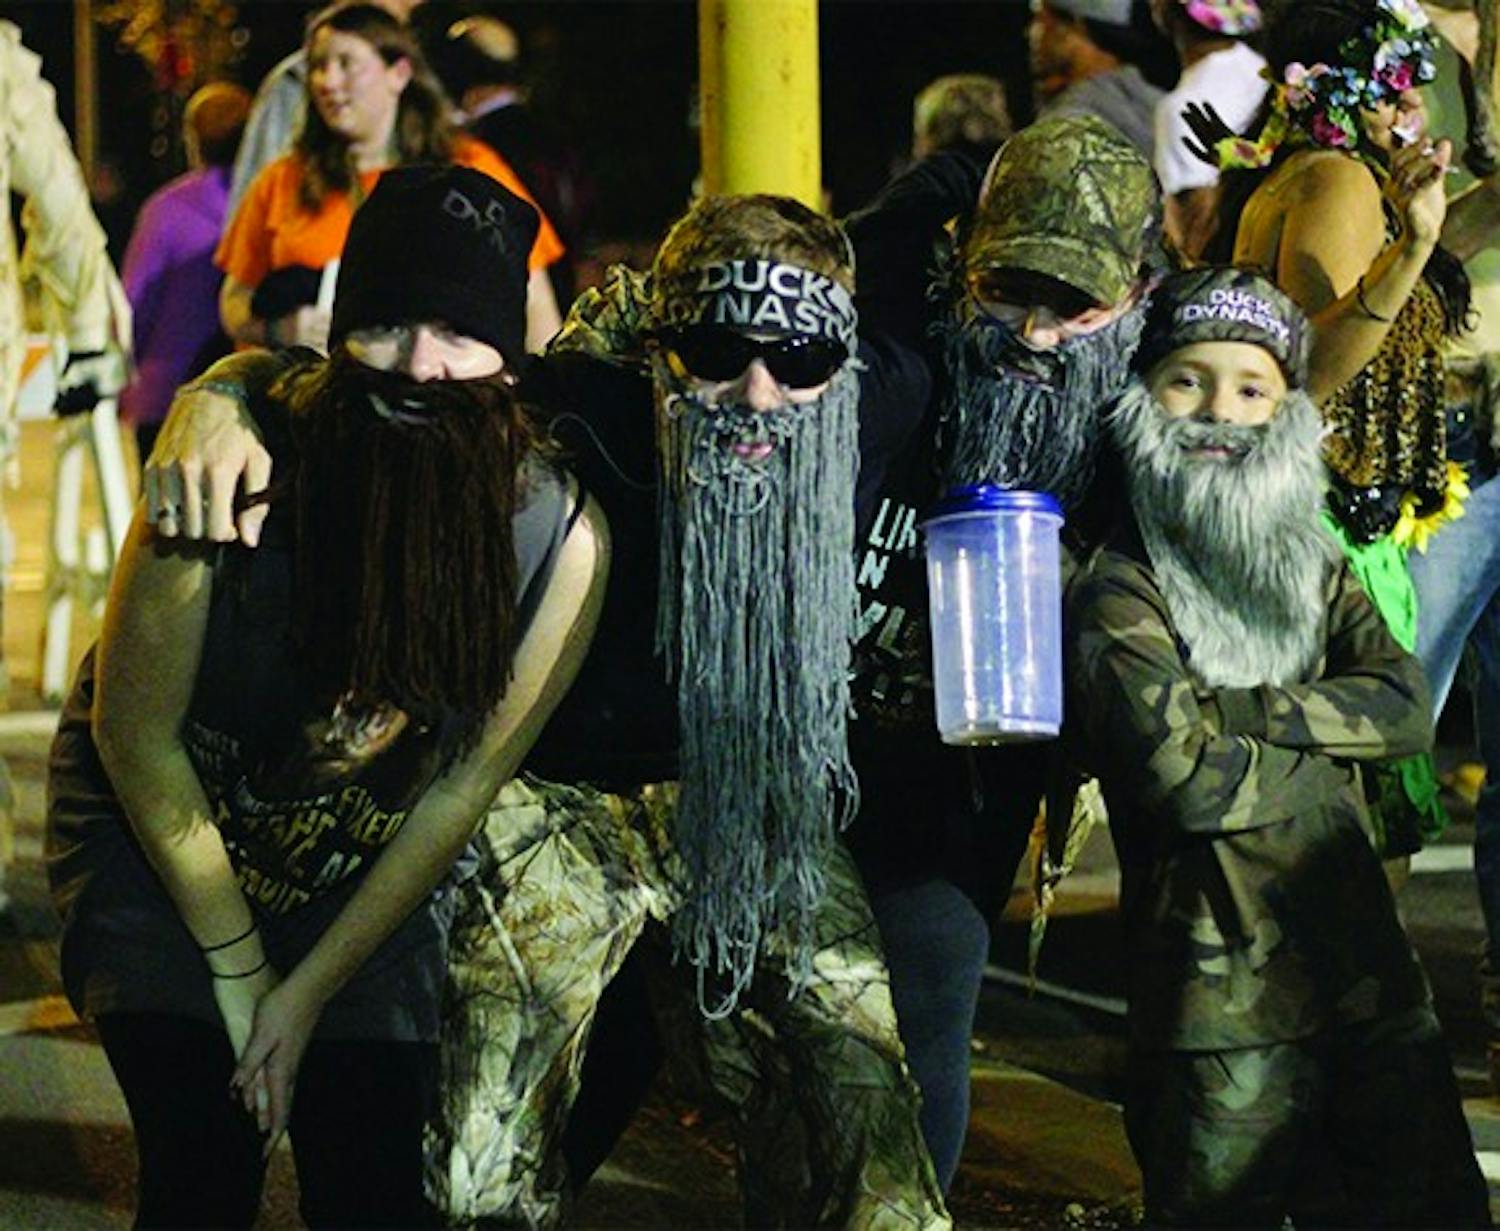 Revelers swarmed the street October 31st to celebrate Halloween on Franklin Street. Around 300 officers were present to make sure the the fifth year of "Homegrown Halloween" went off without a hitch in downtown Chapel Hill. One group decided to dress up as the popular sensation Duck Dynasty, complete with mop beards and a child.